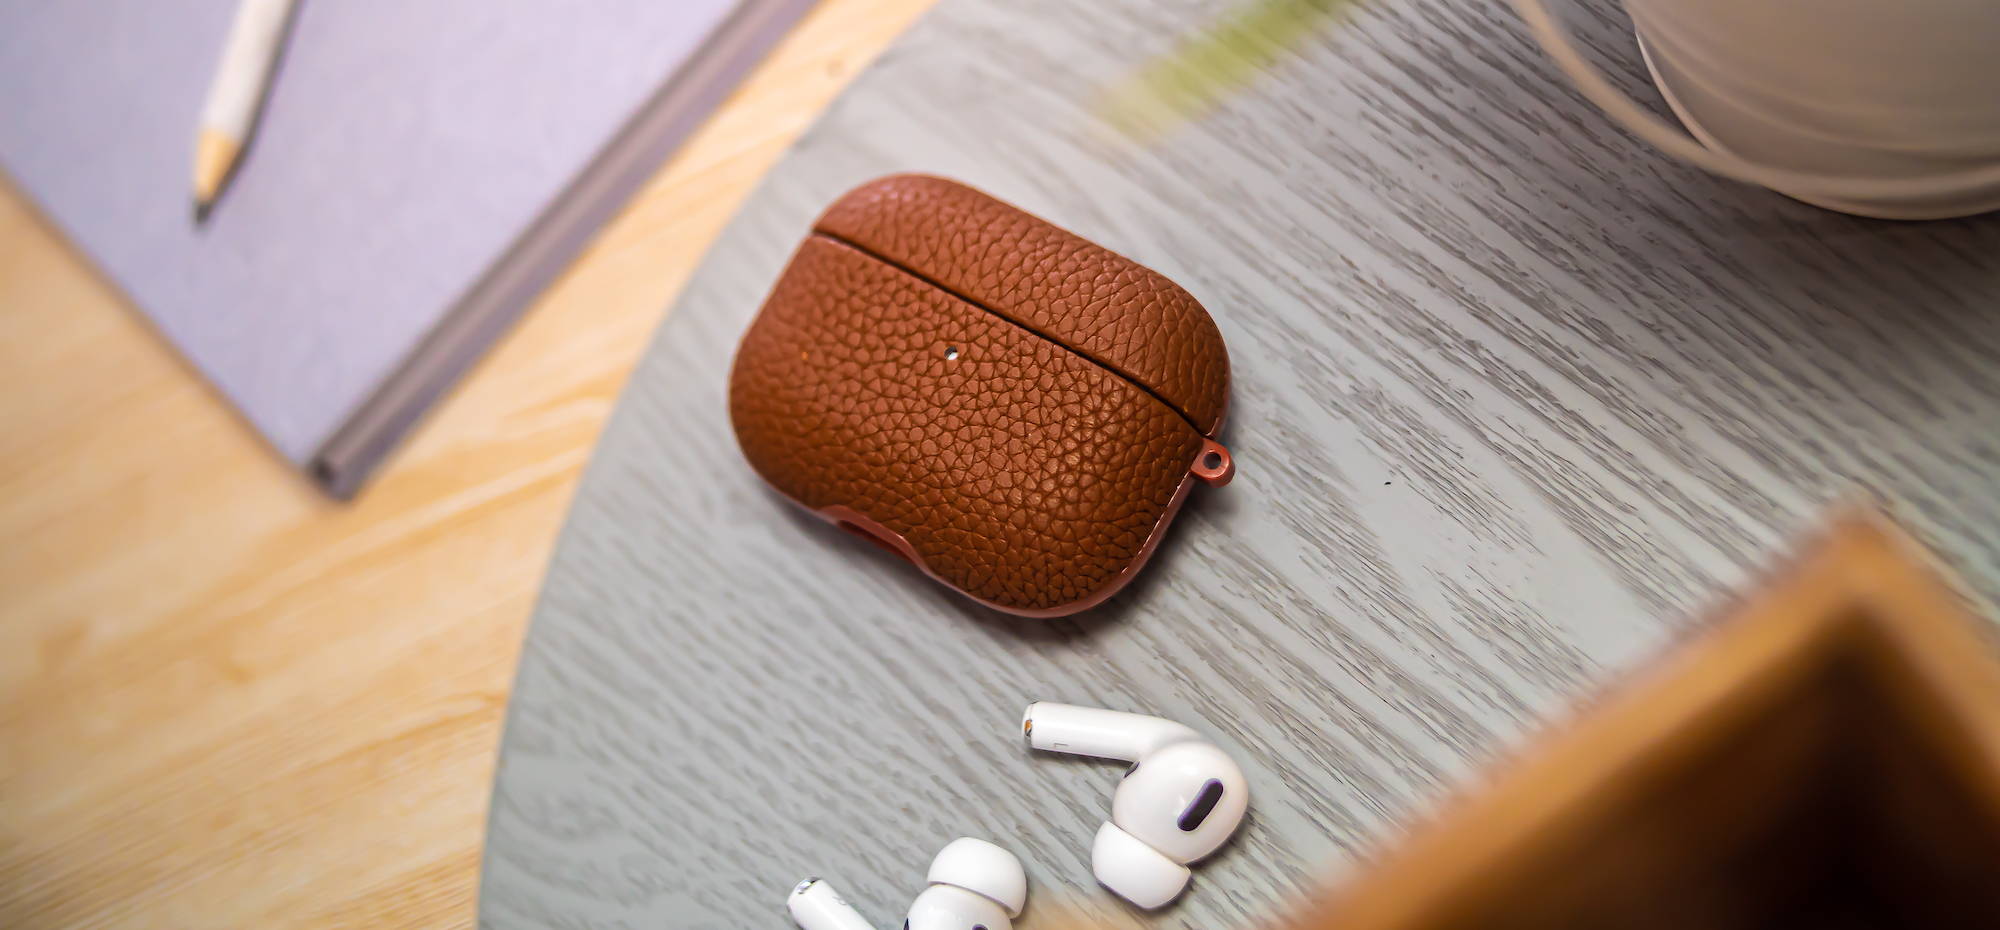 Brown genuine leather airpods case laying flay on table 